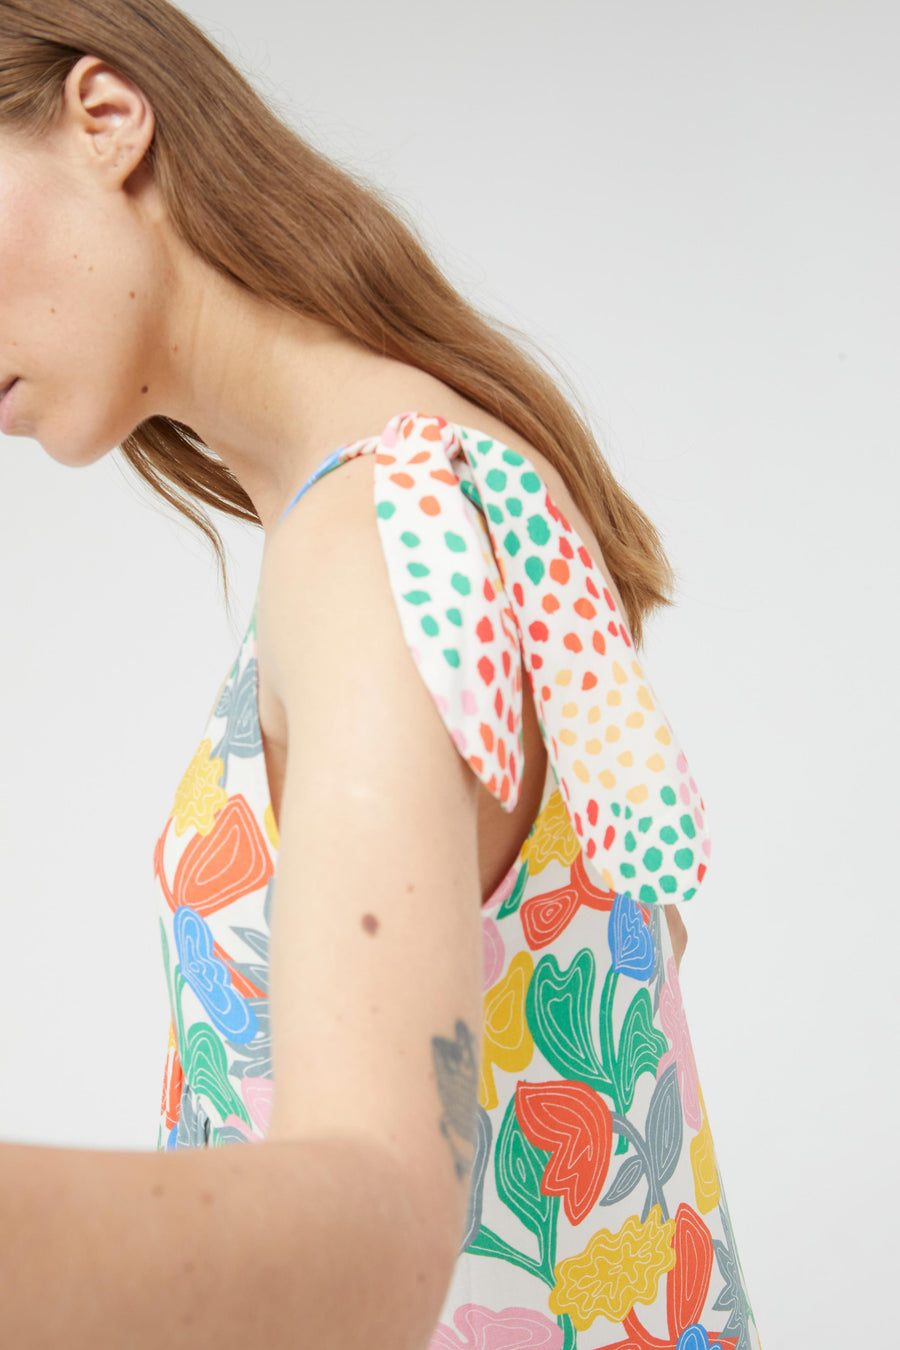 Midi Dress with Floral Pattern